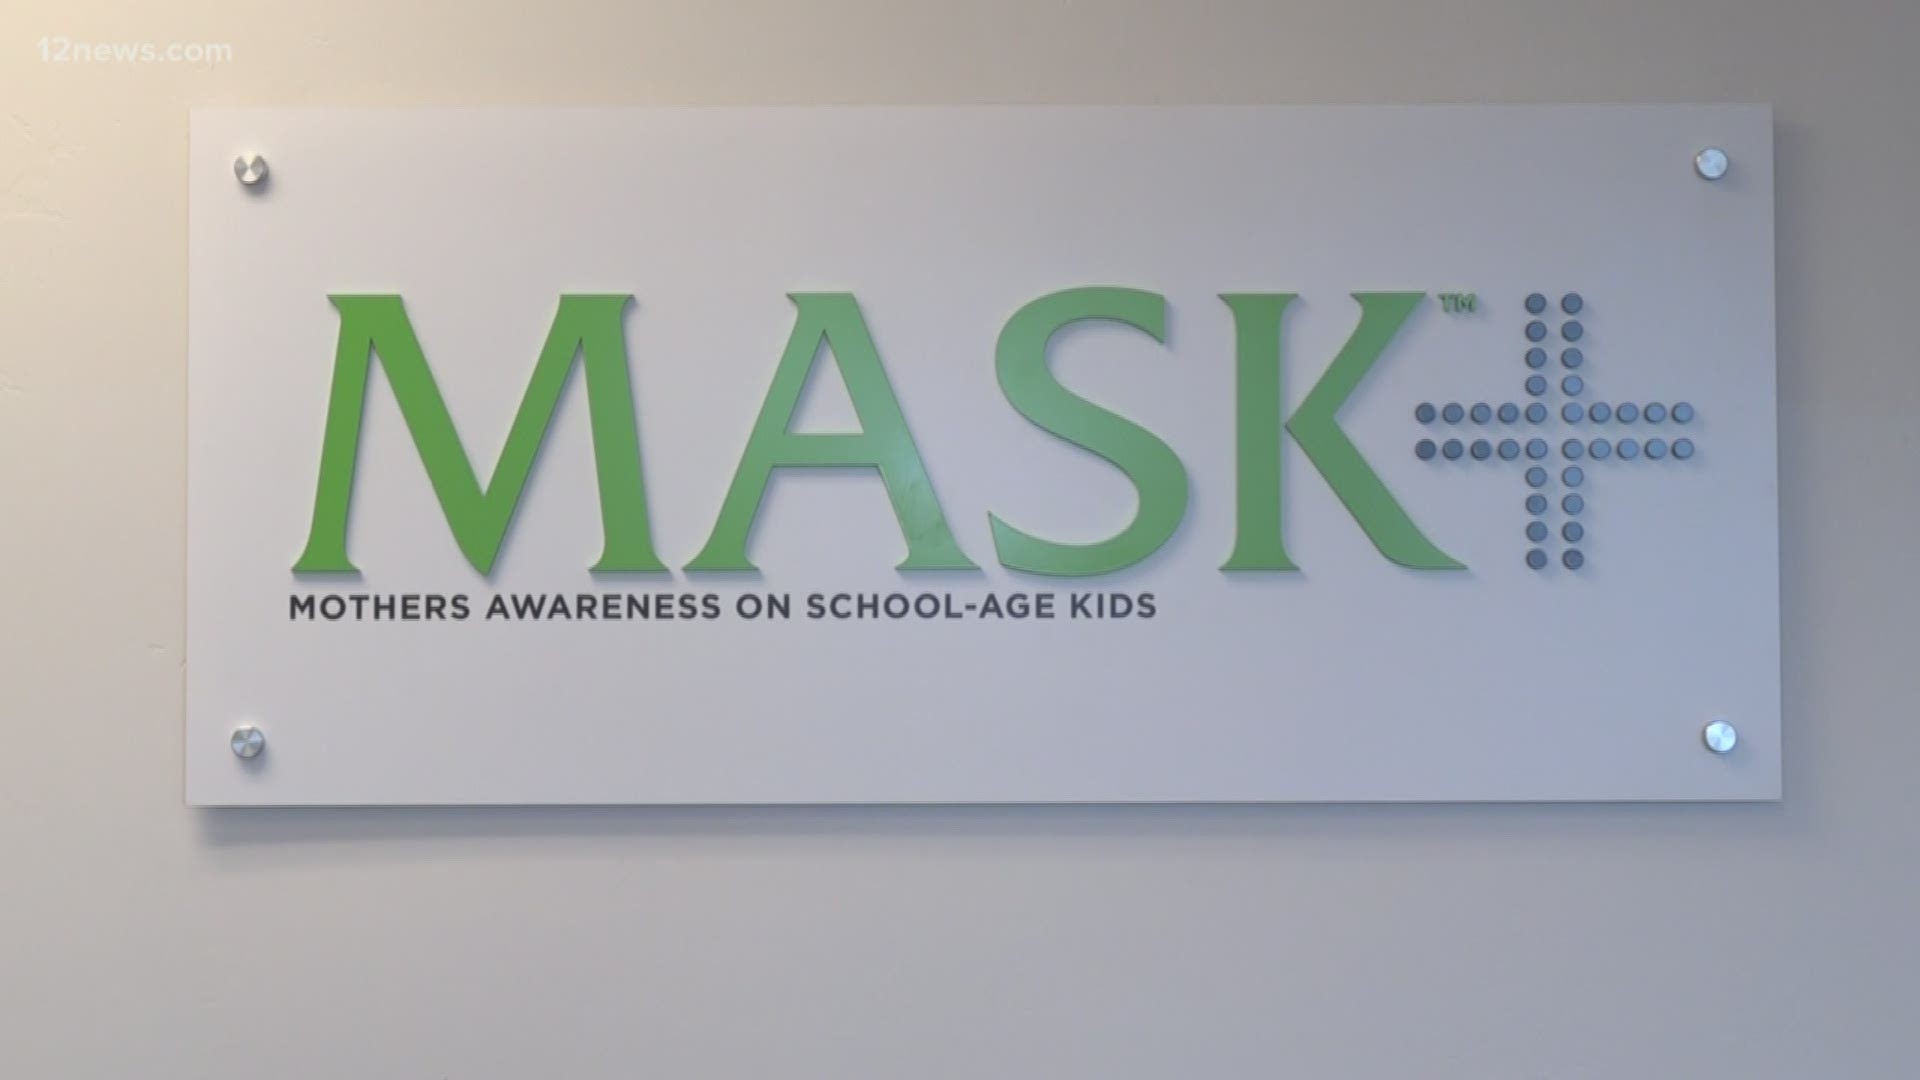 A new law in Oregon allows students to take mental health days. A Valley organization, MASK (Mother's Awareness on School-age Kids), thinks it's a good idea and is pushing for a similar kind of law in Arizona schools.